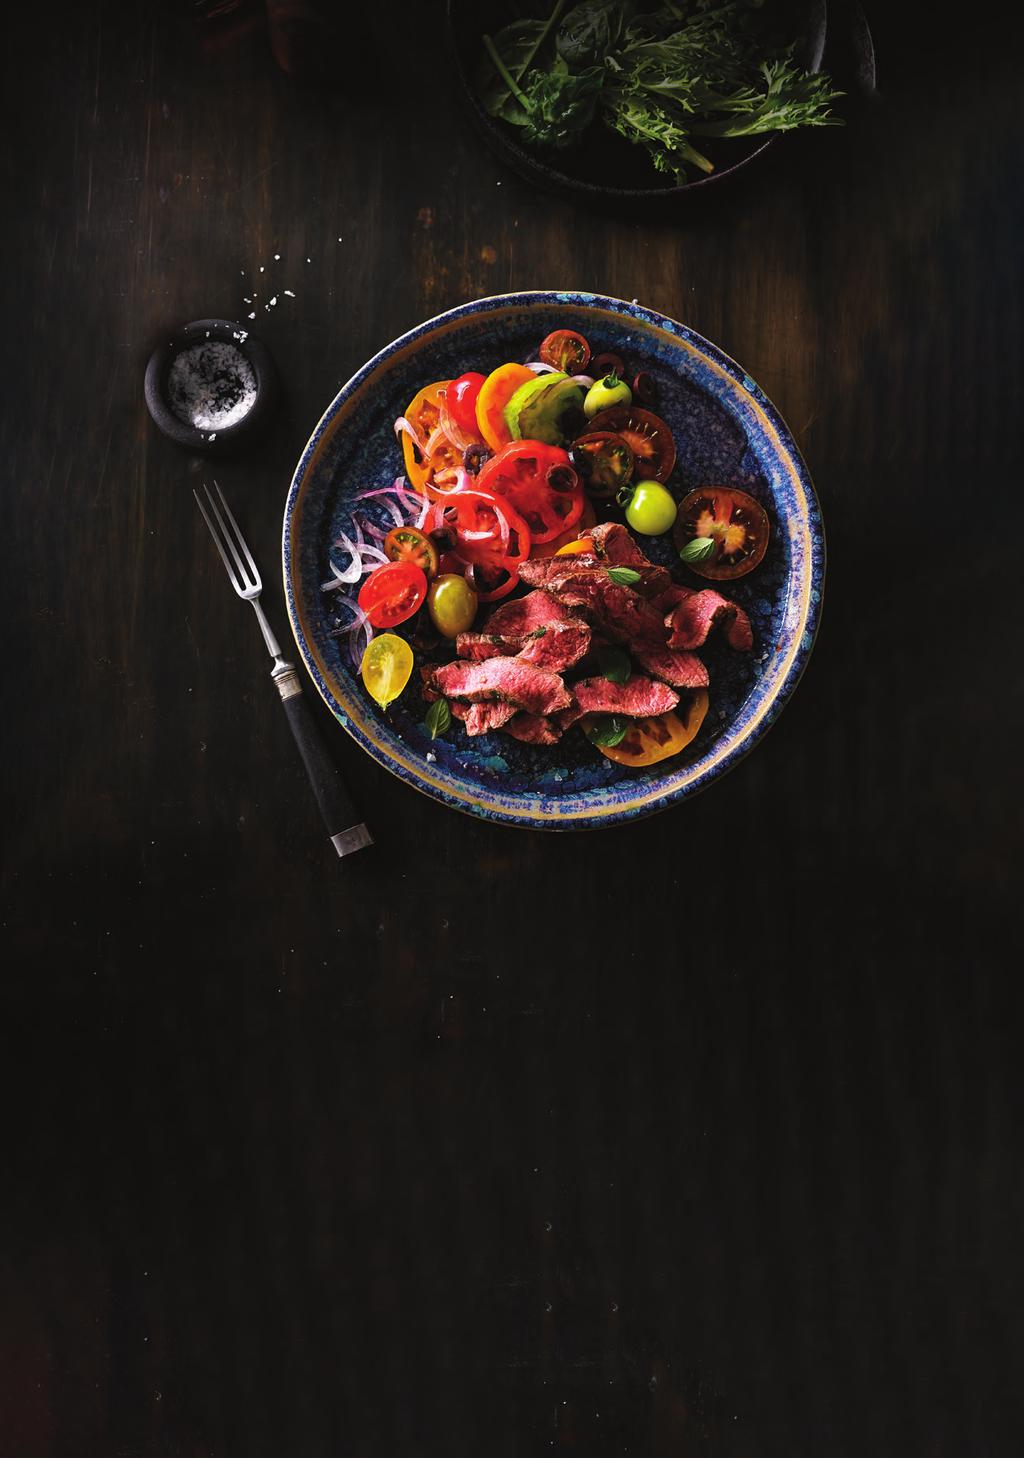 Grilled flat iron steak with tomato, olive and oregano salad Serves: 4 Prep time: 10 minutes, plus marinating time Cooking: 8 minutes Ingredients 4x 170g flat iron steaks 1